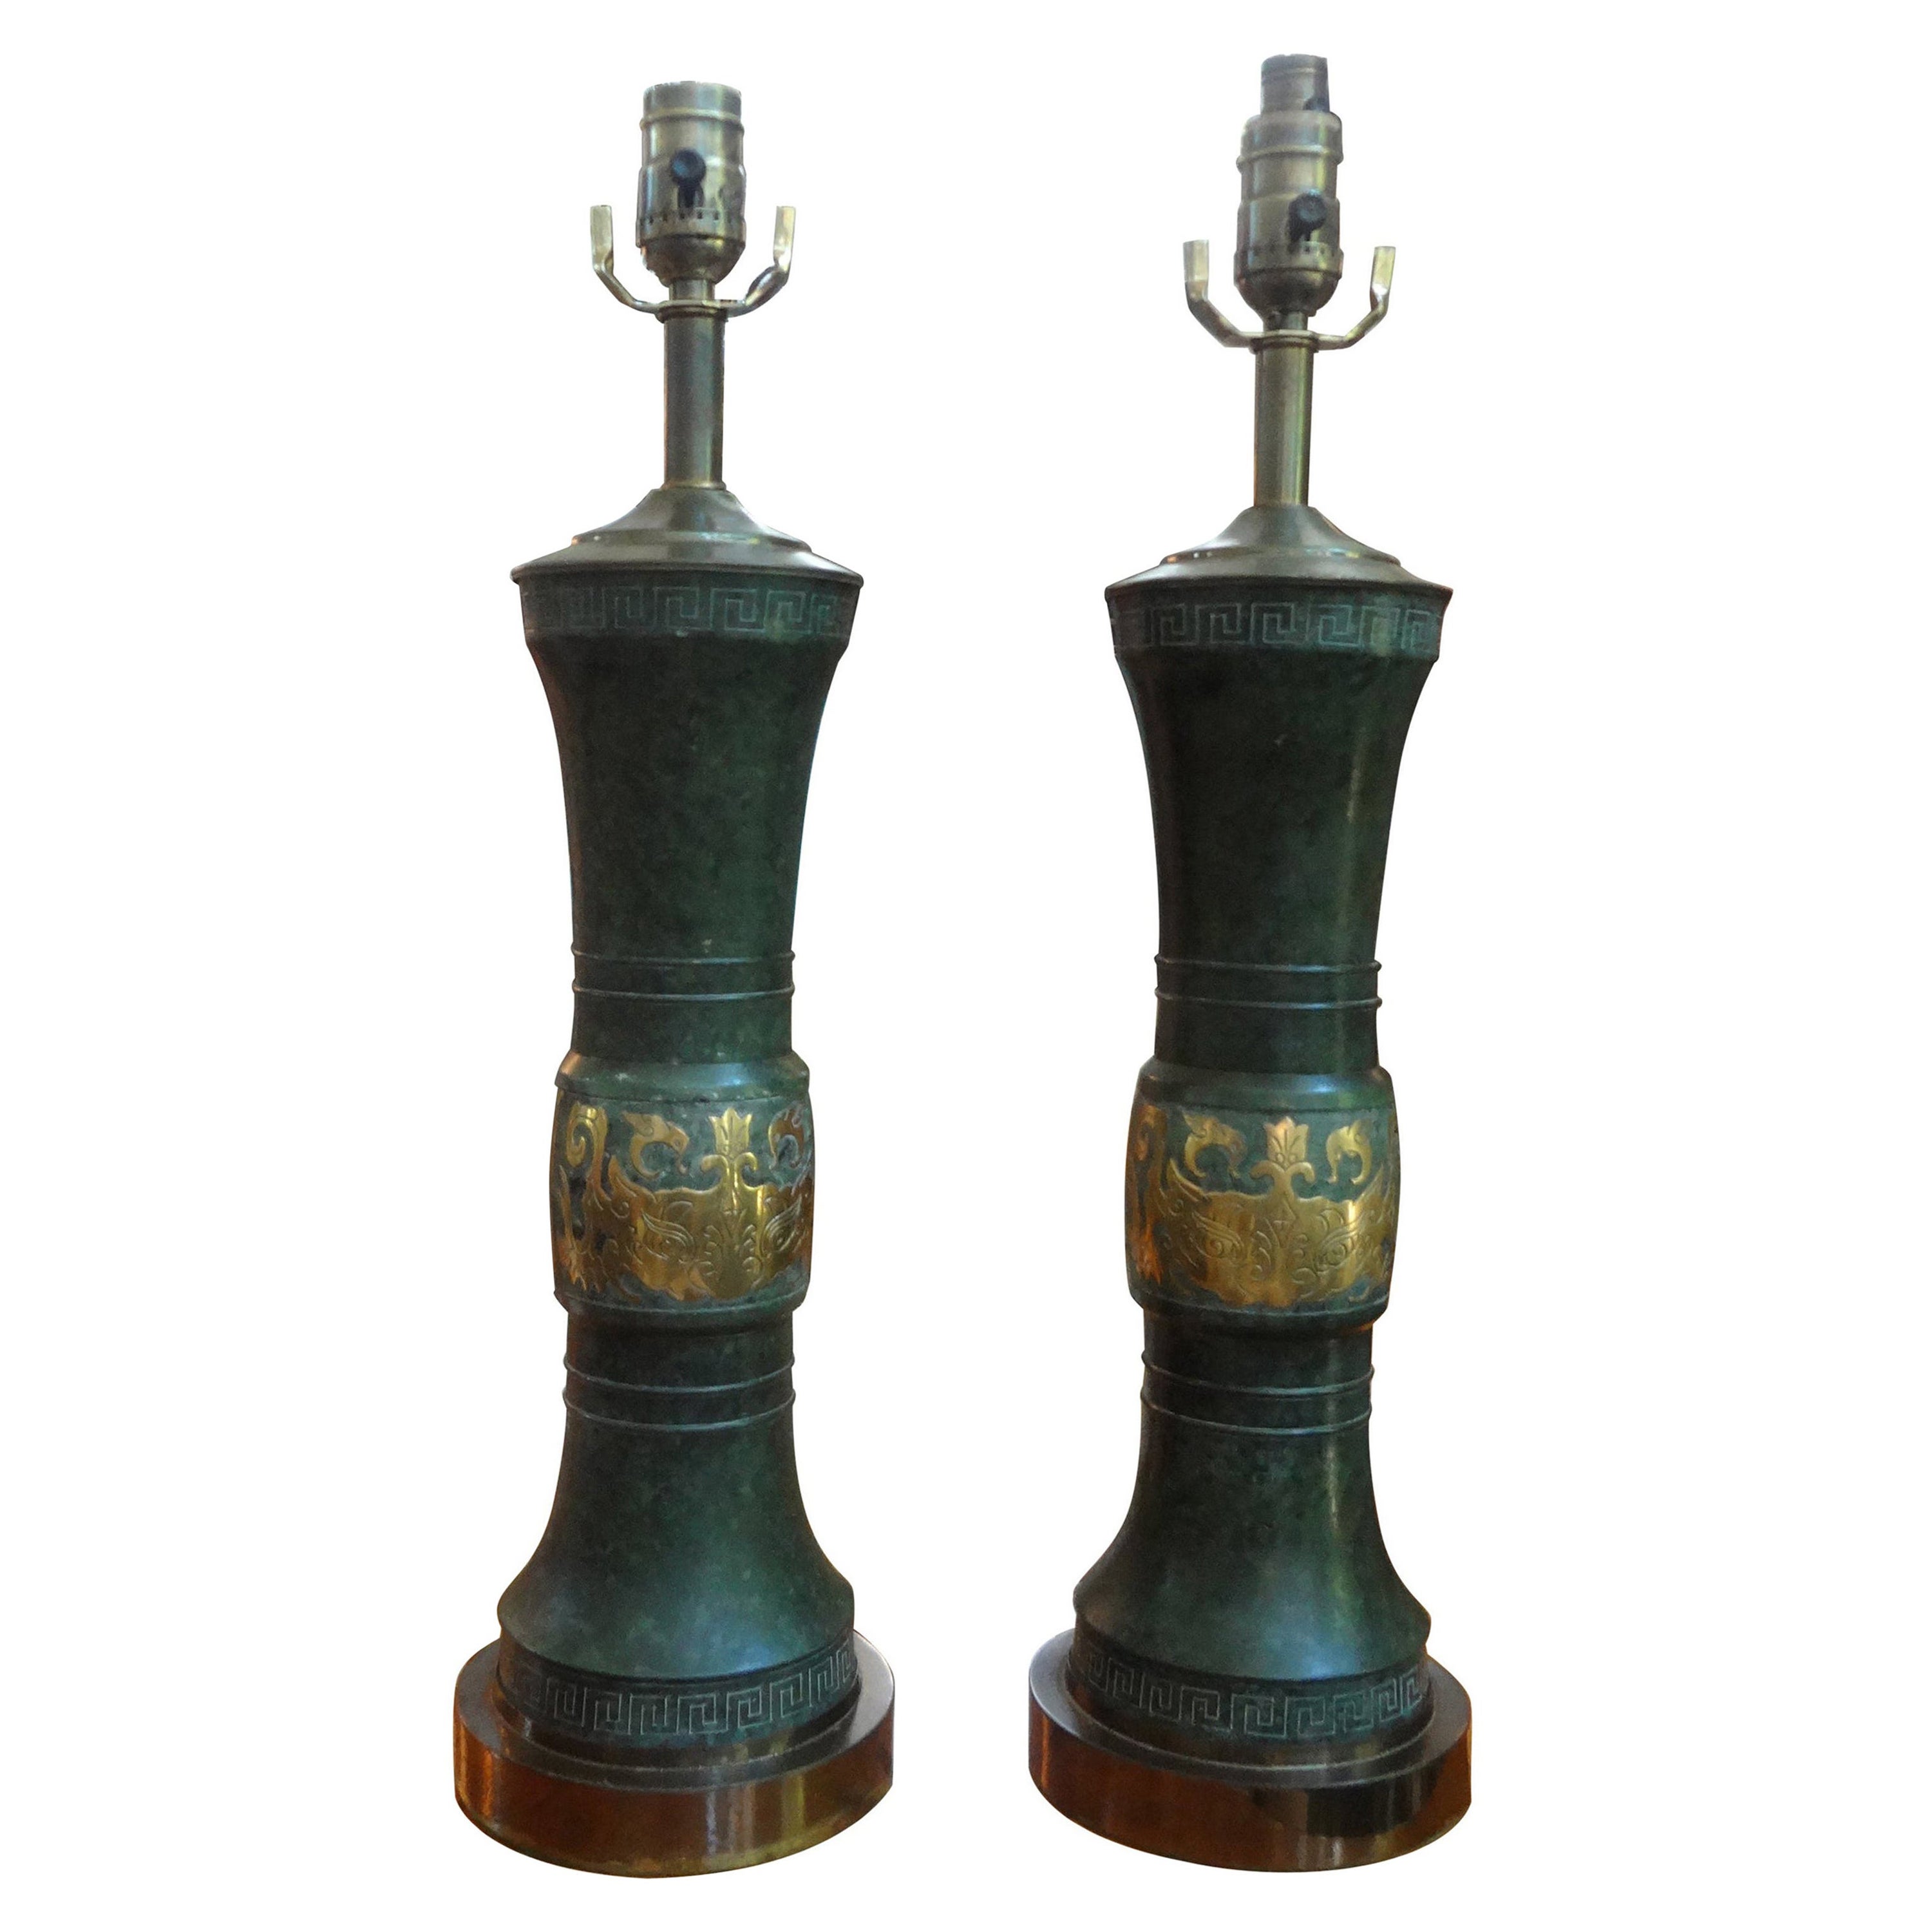 Pair of James Mont Style Lamps with Greek Key Design